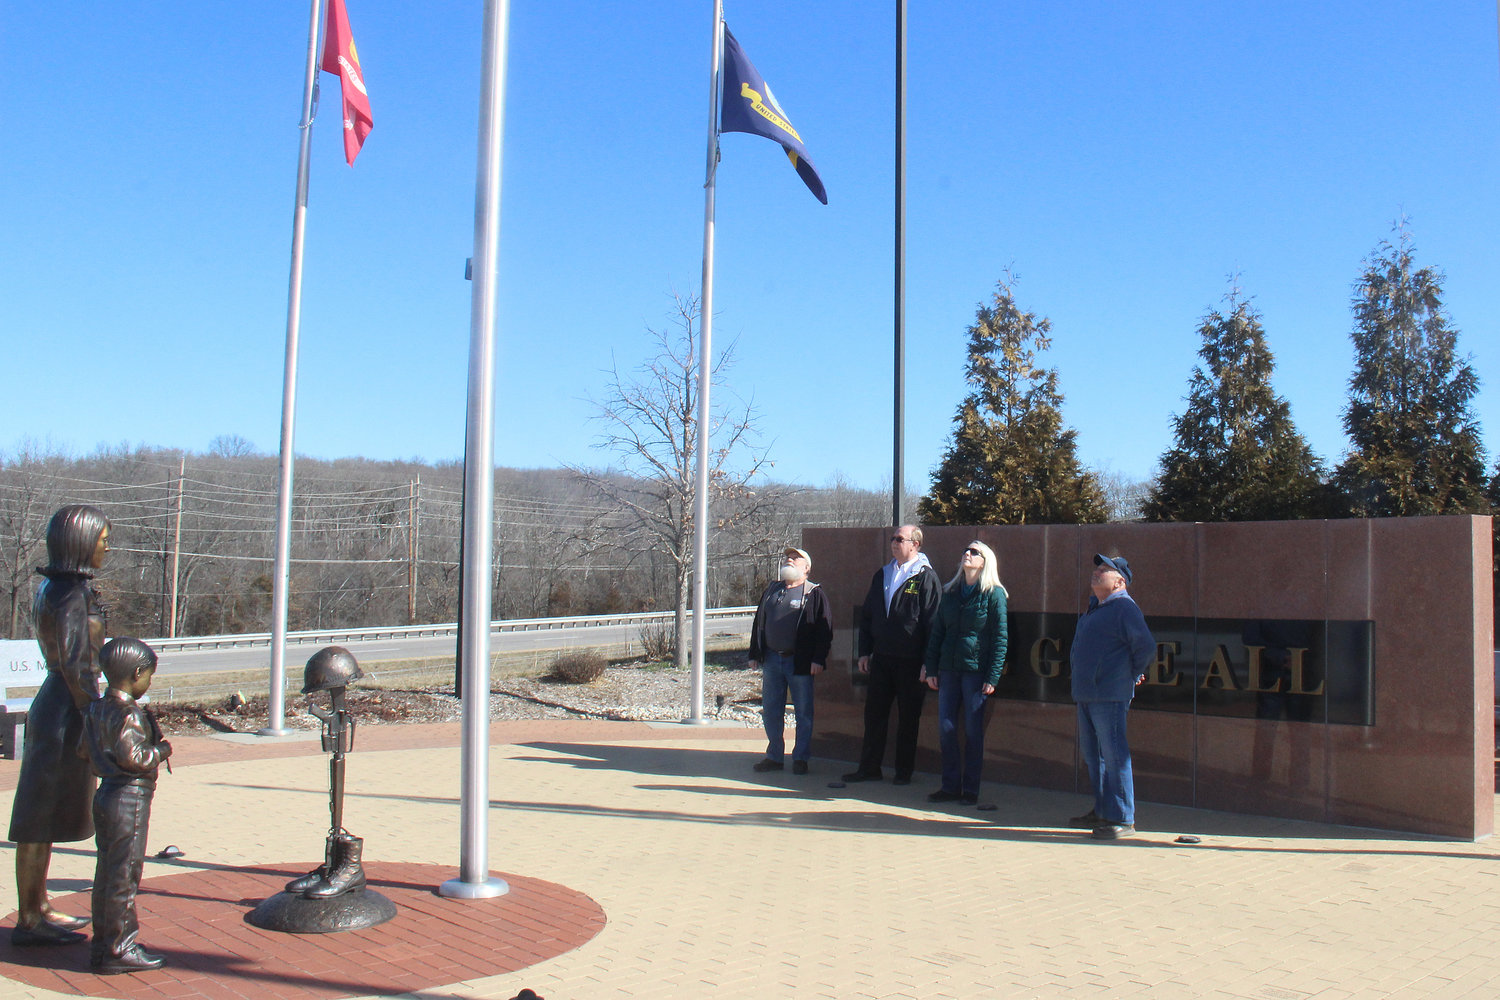 VISITING MEMORIAL — Tribute to Veterans Memorial board members and committee members visit the memorial site, located at the intersection of Veterans Memorial Parkway and Market Street in Warrenton. Pictured, from left, are Joe Vincent, Ralph Hellebusch, Kathy Daly and Rick Mantione.